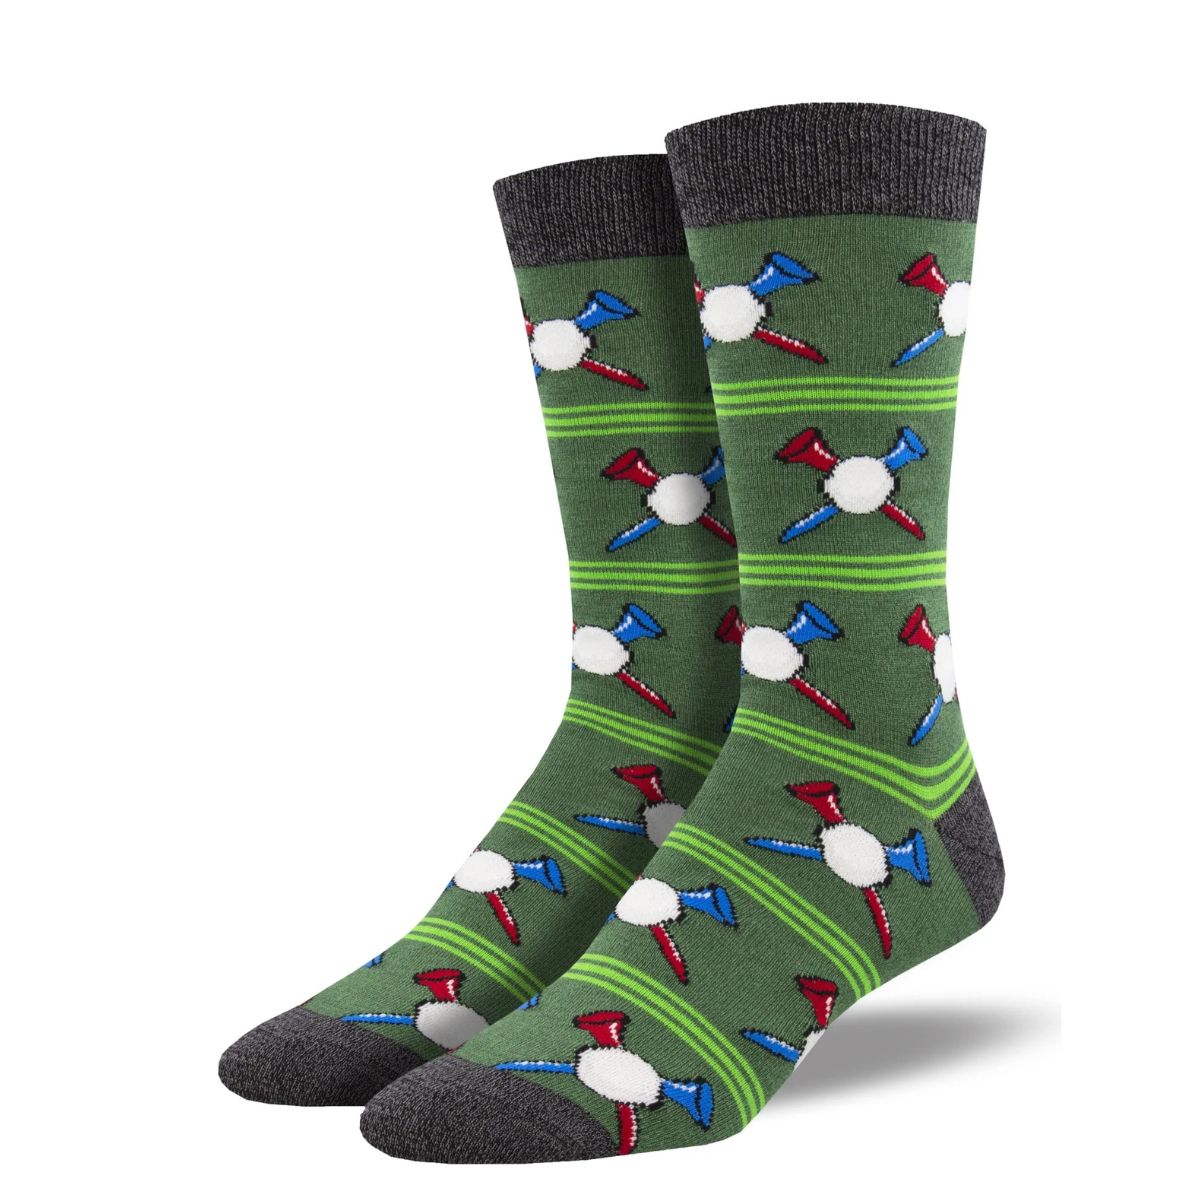 Tee off socks a pair of green crew socks with tee and golf ball print